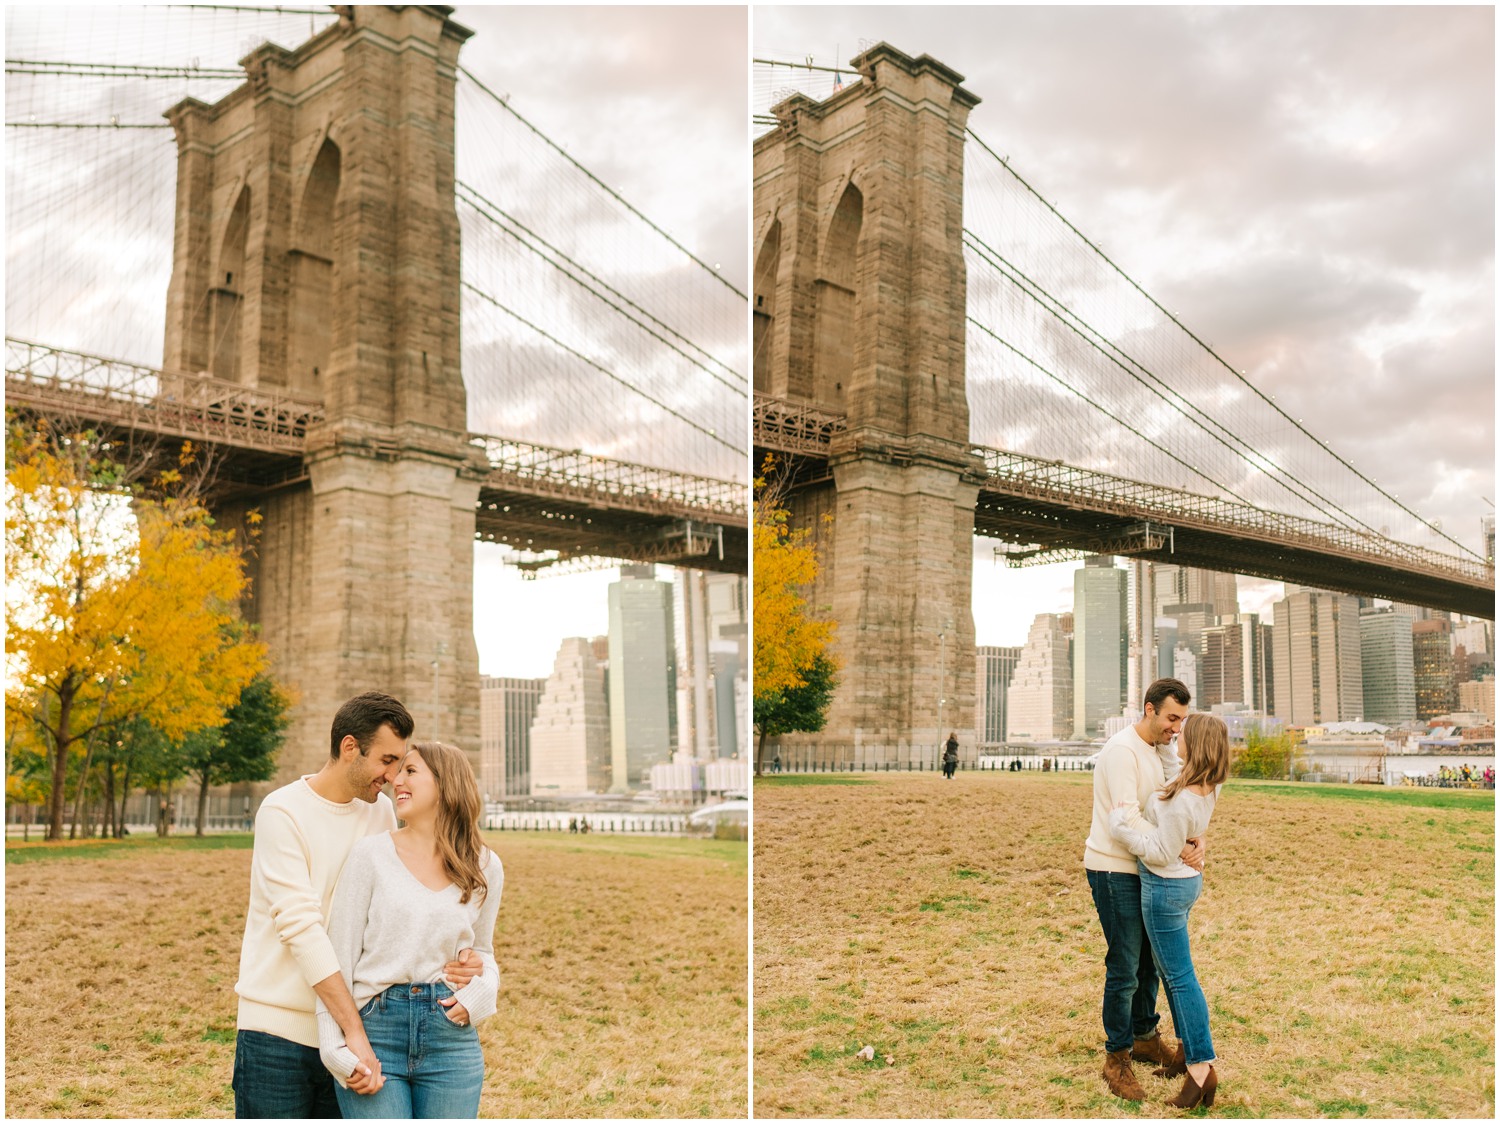 New York couple poses by Brooklyn Bridge in New York City during engagement session